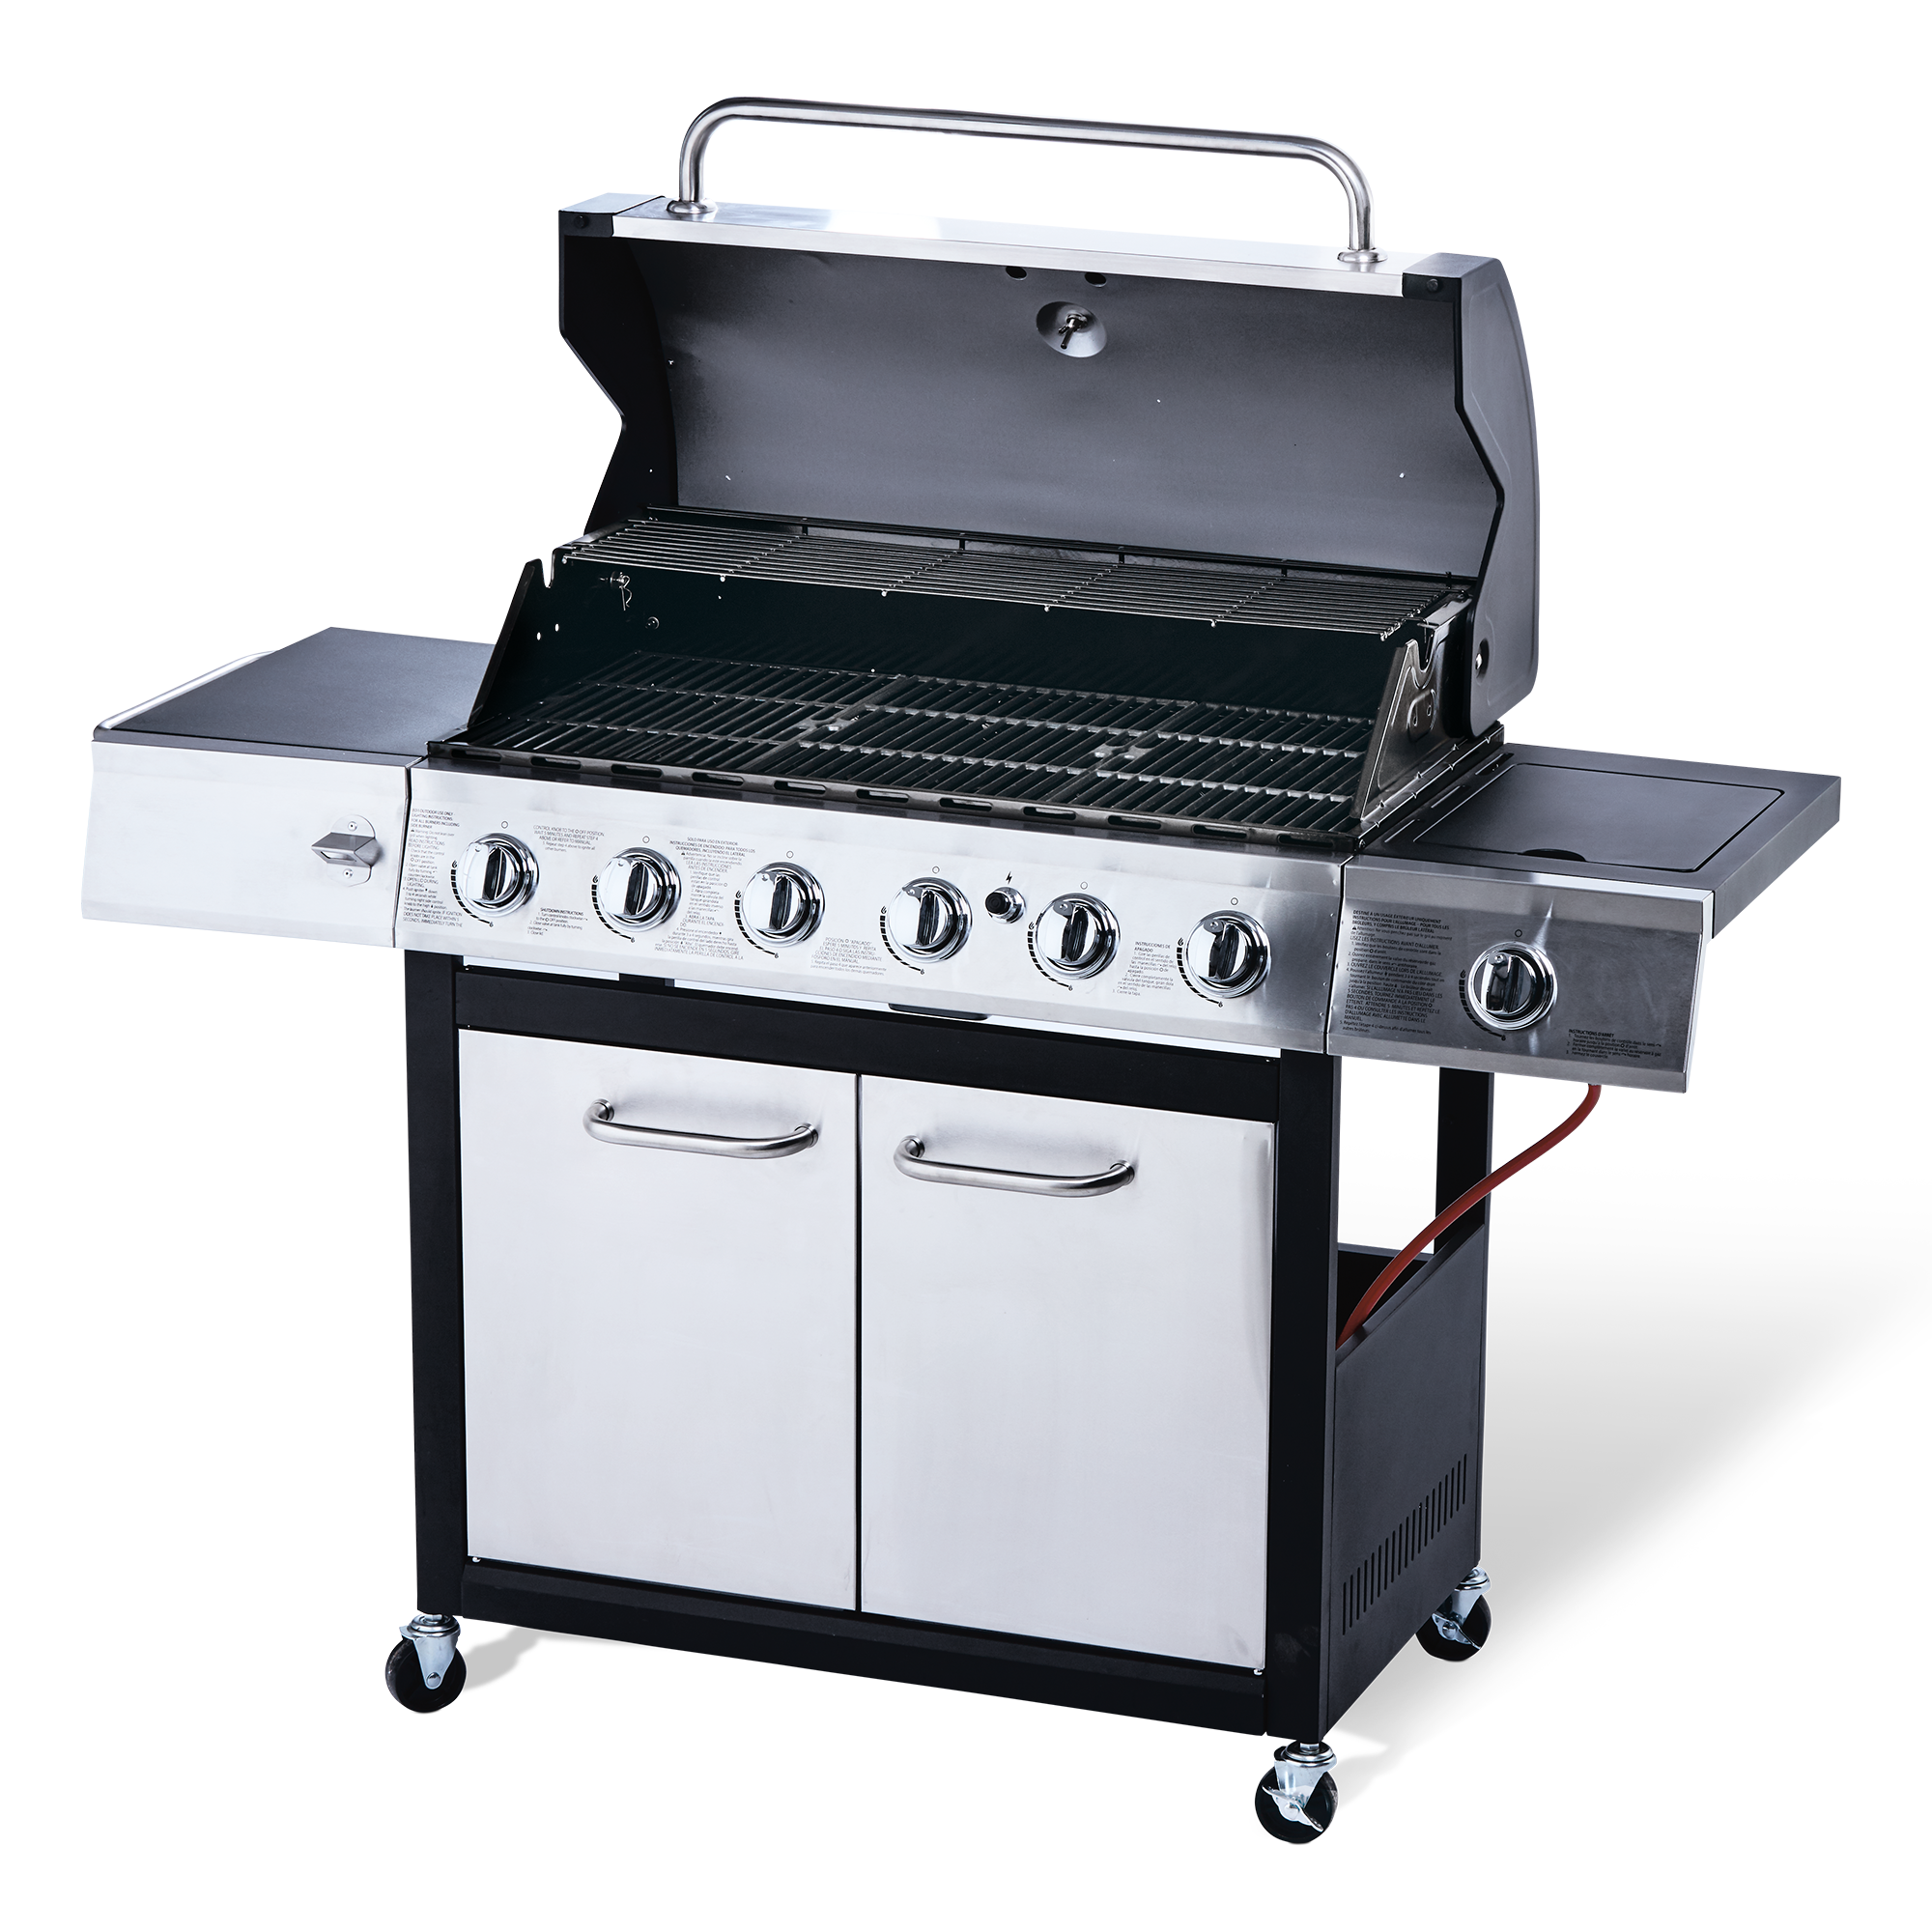 Gasgrill 'Big Family' mit Seitenbrenner + product picture